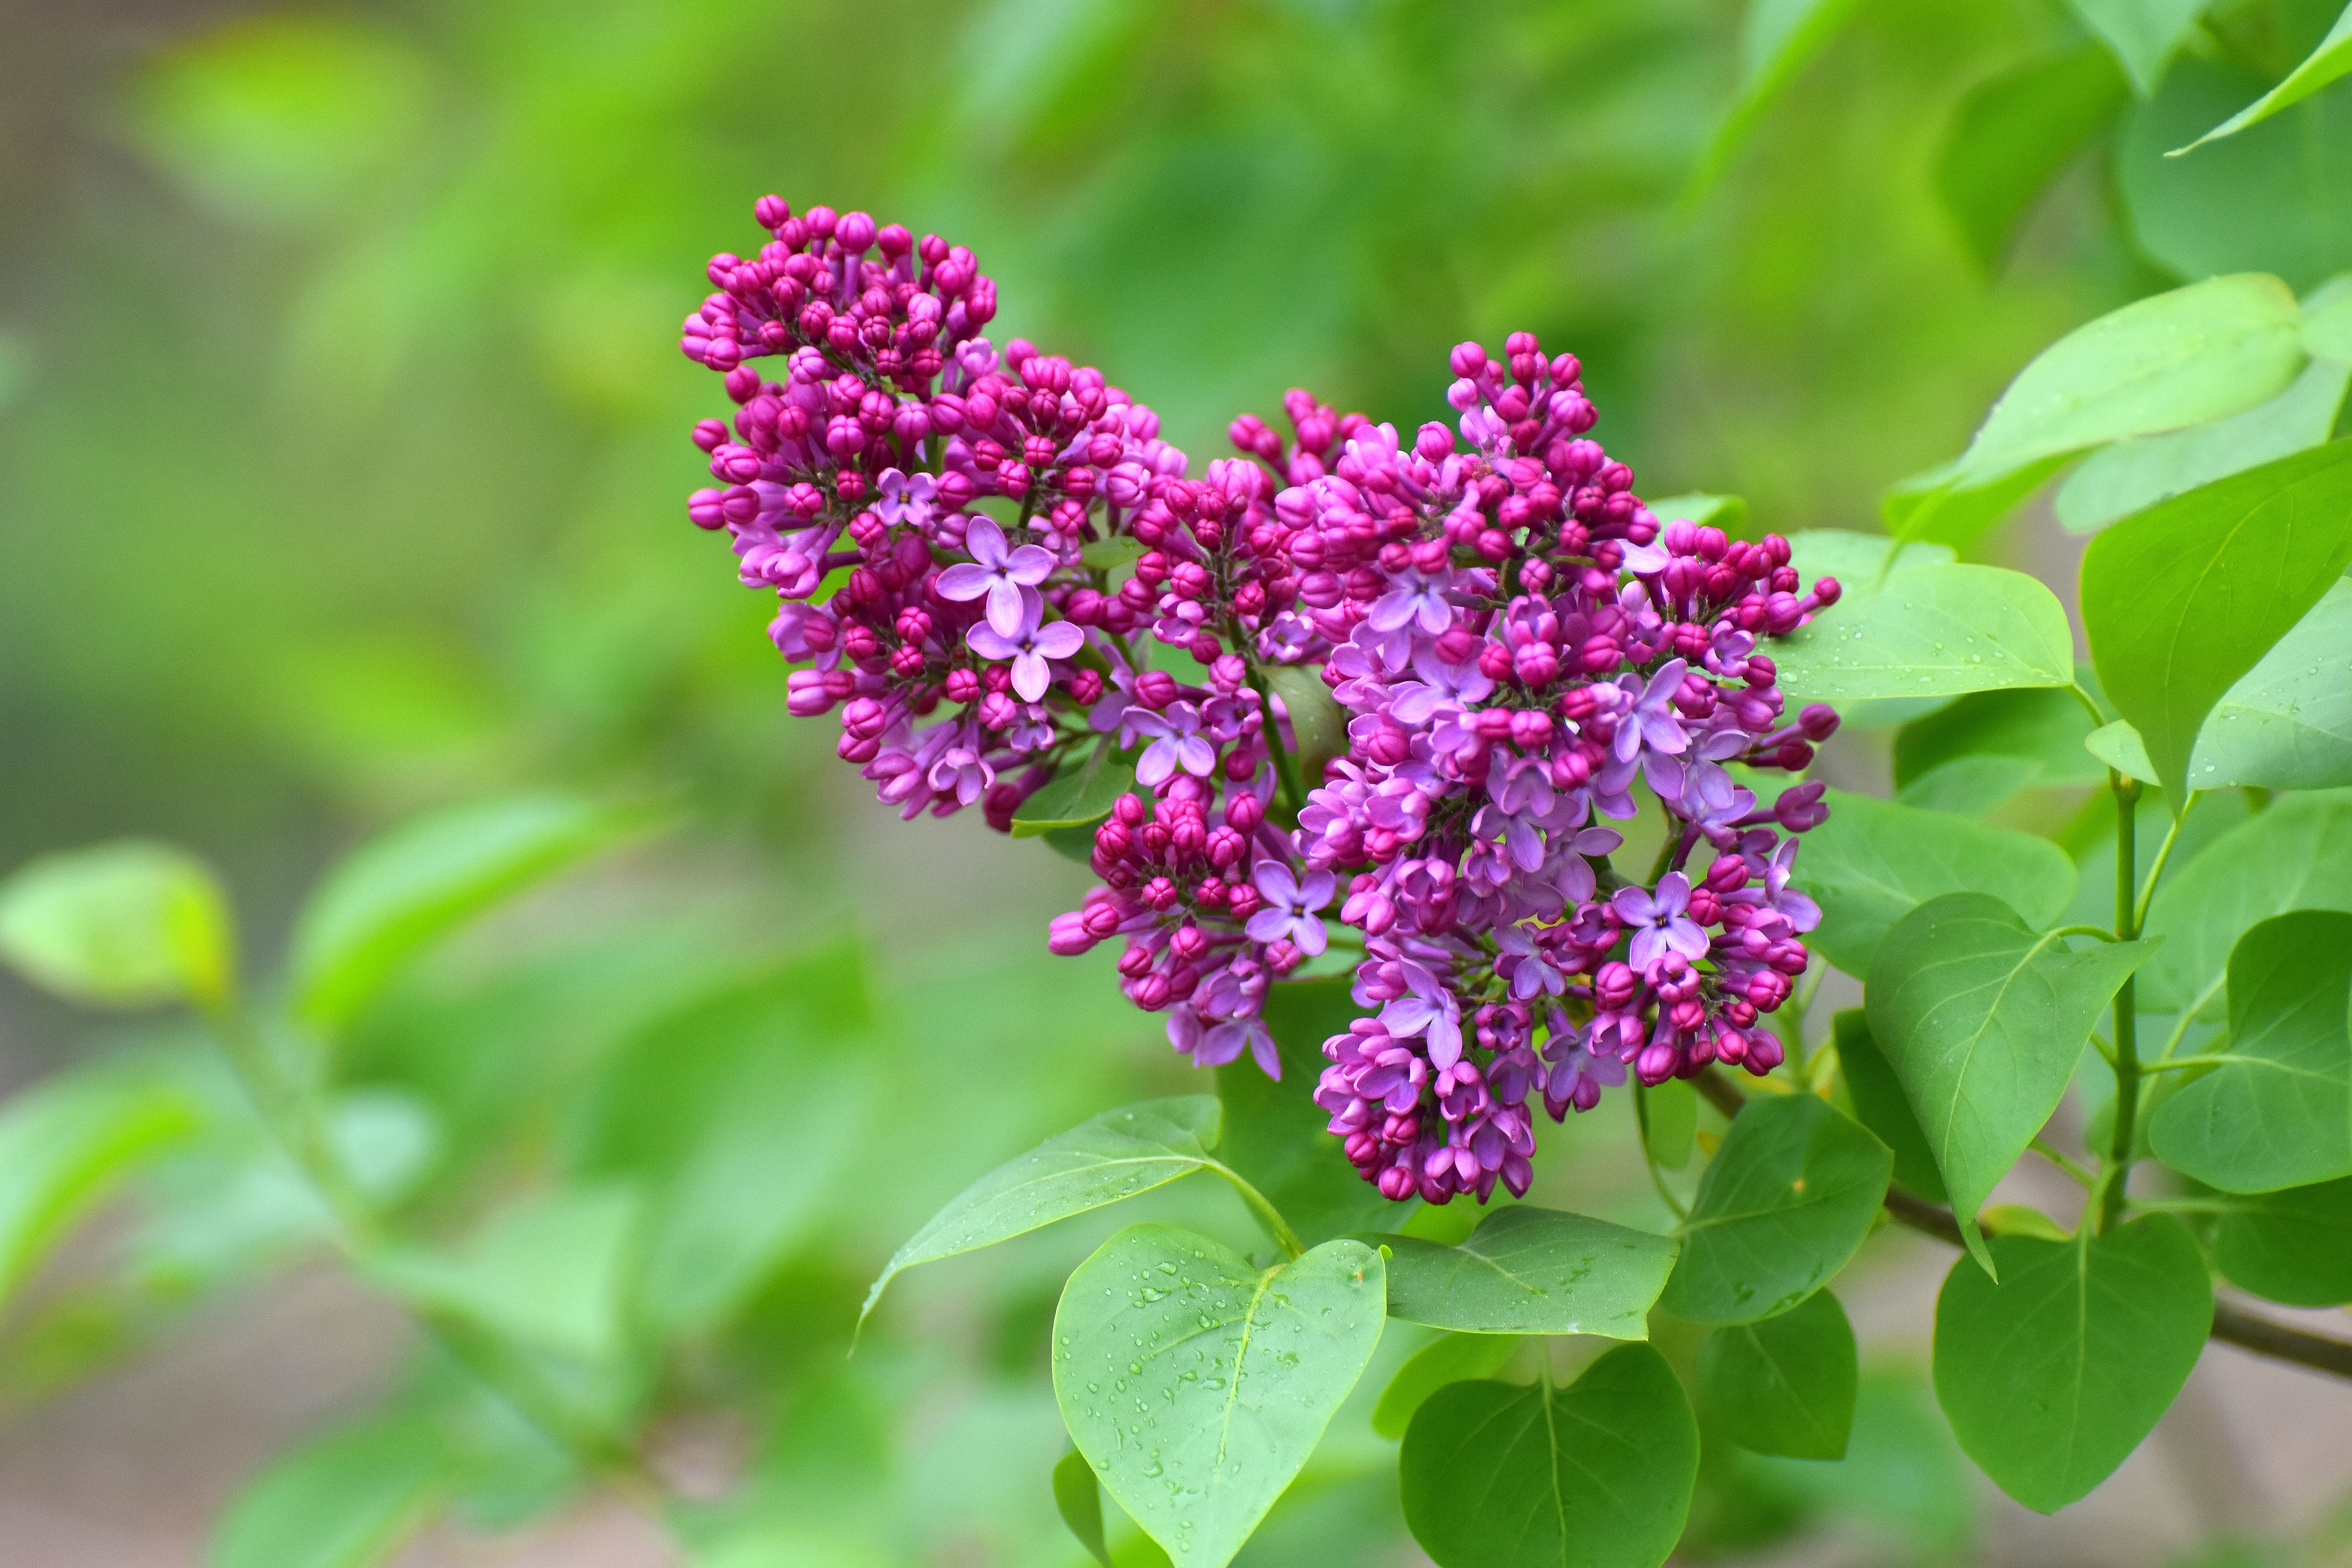 lilacs are blooming | made w/ Imgflip meme maker